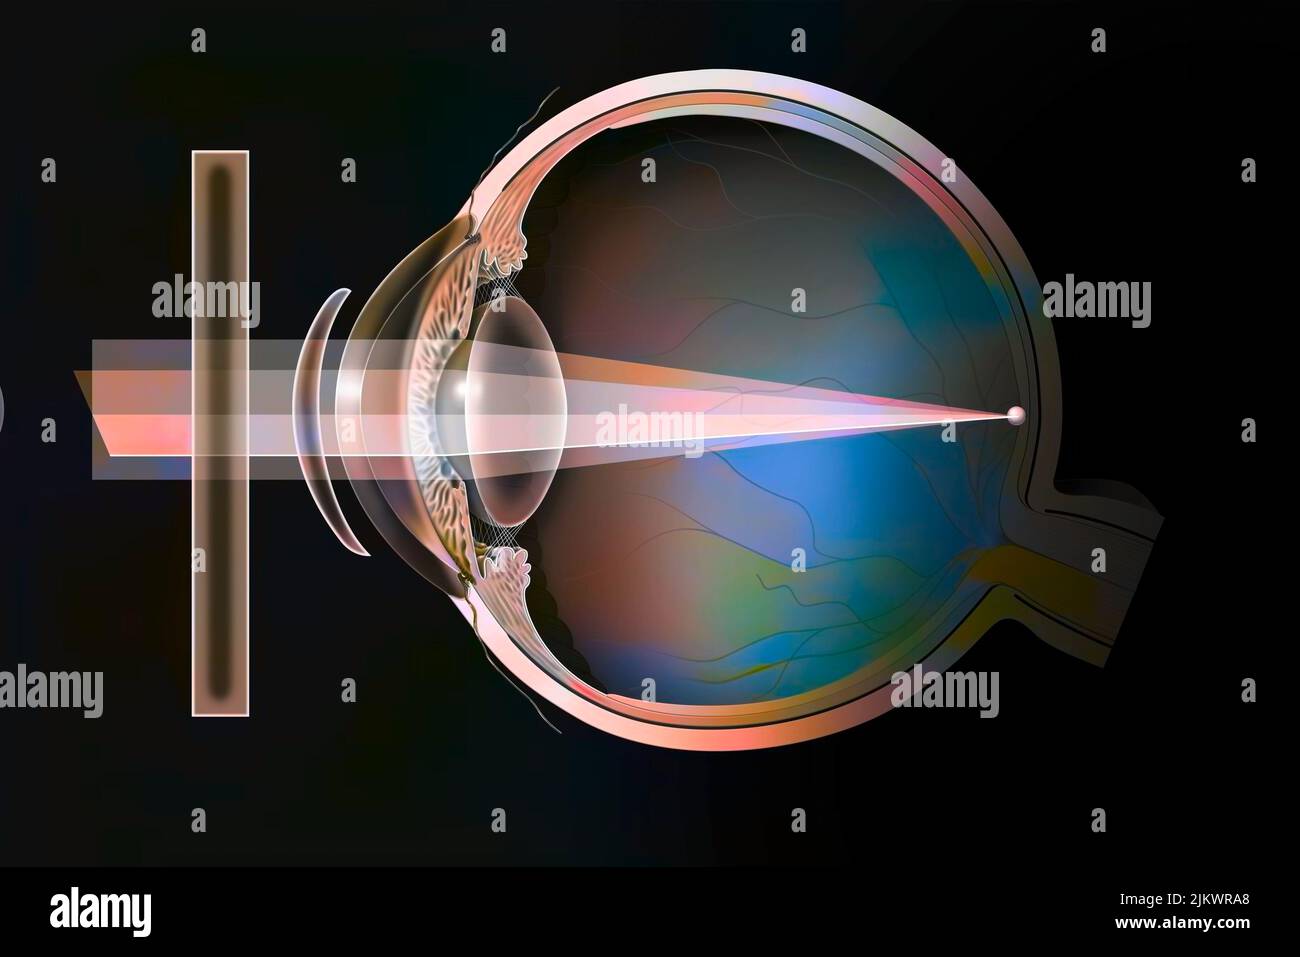 Various possible corrections on an astigmatic eye: spectacle lenses, external lenses. Stock Photo